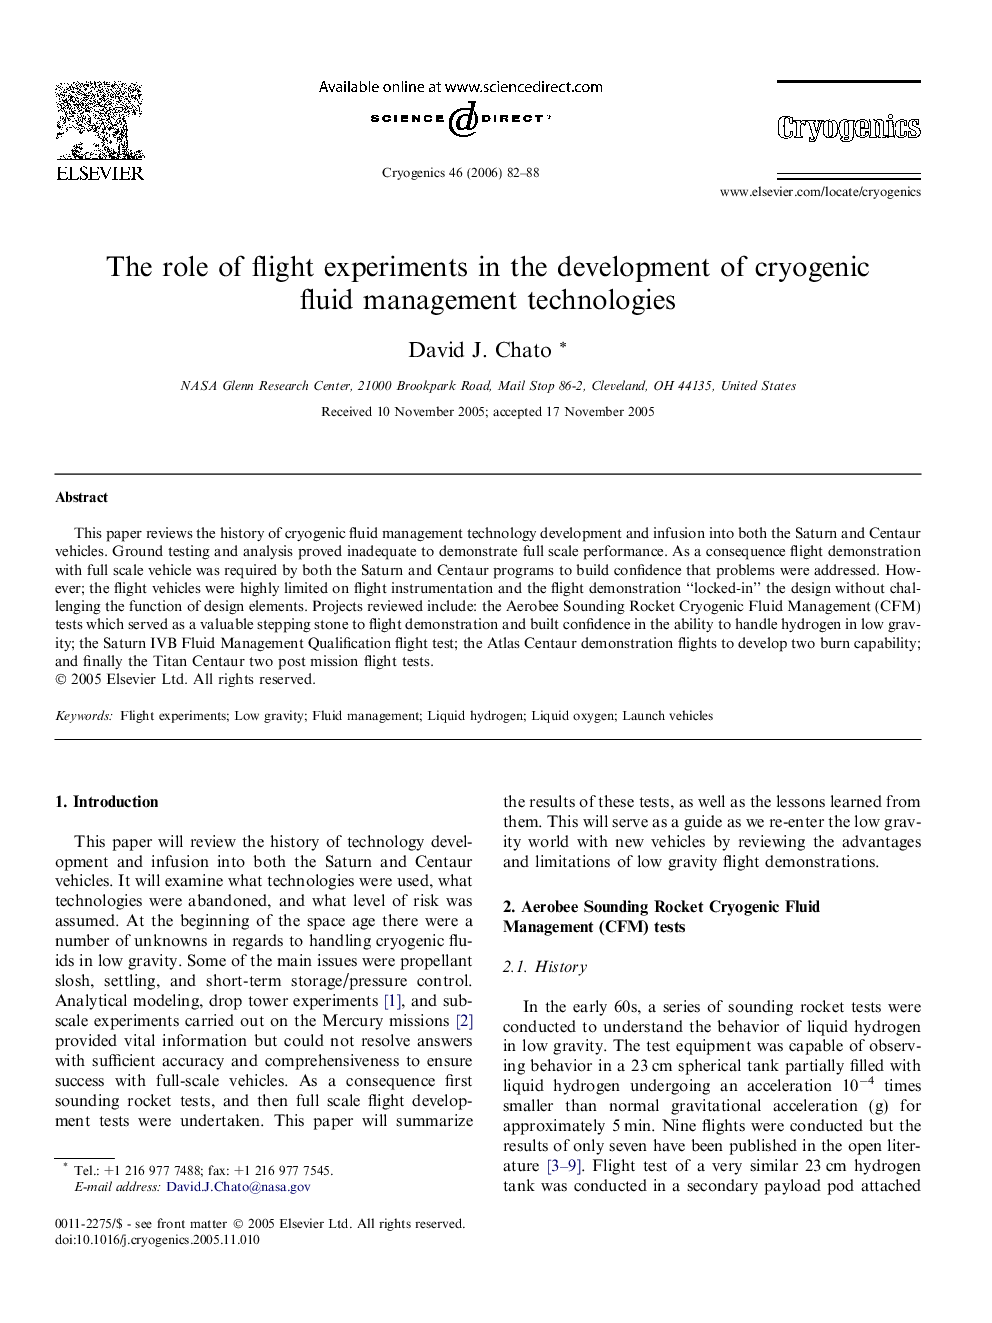 The role of flight experiments in the development of cryogenic fluid management technologies